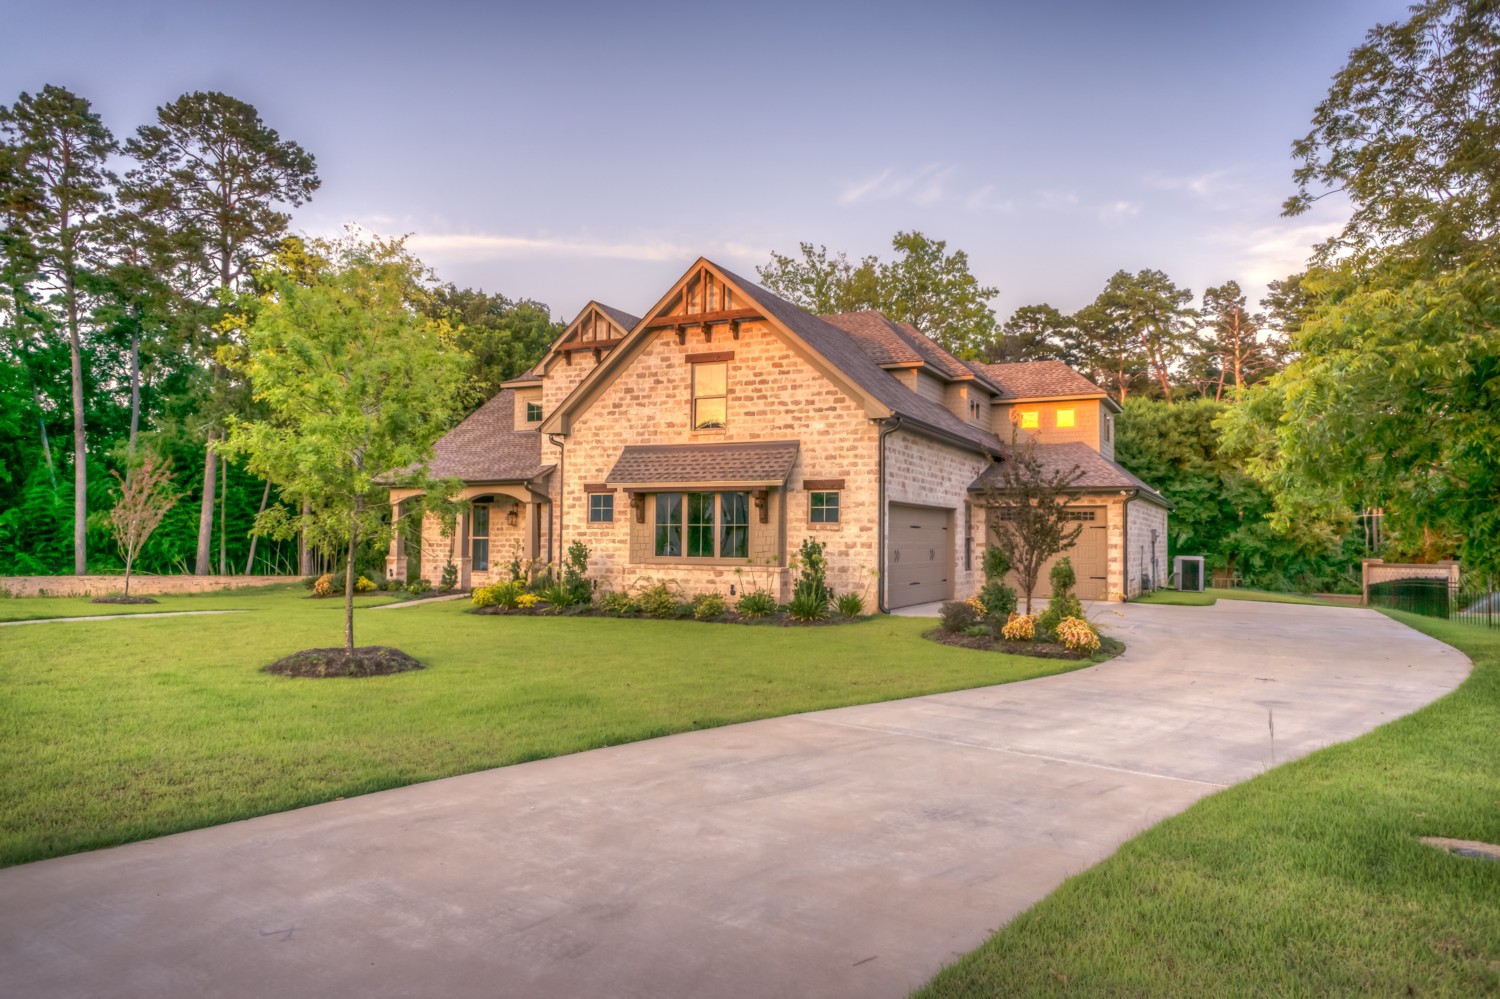 Photo of a well landscaped house.